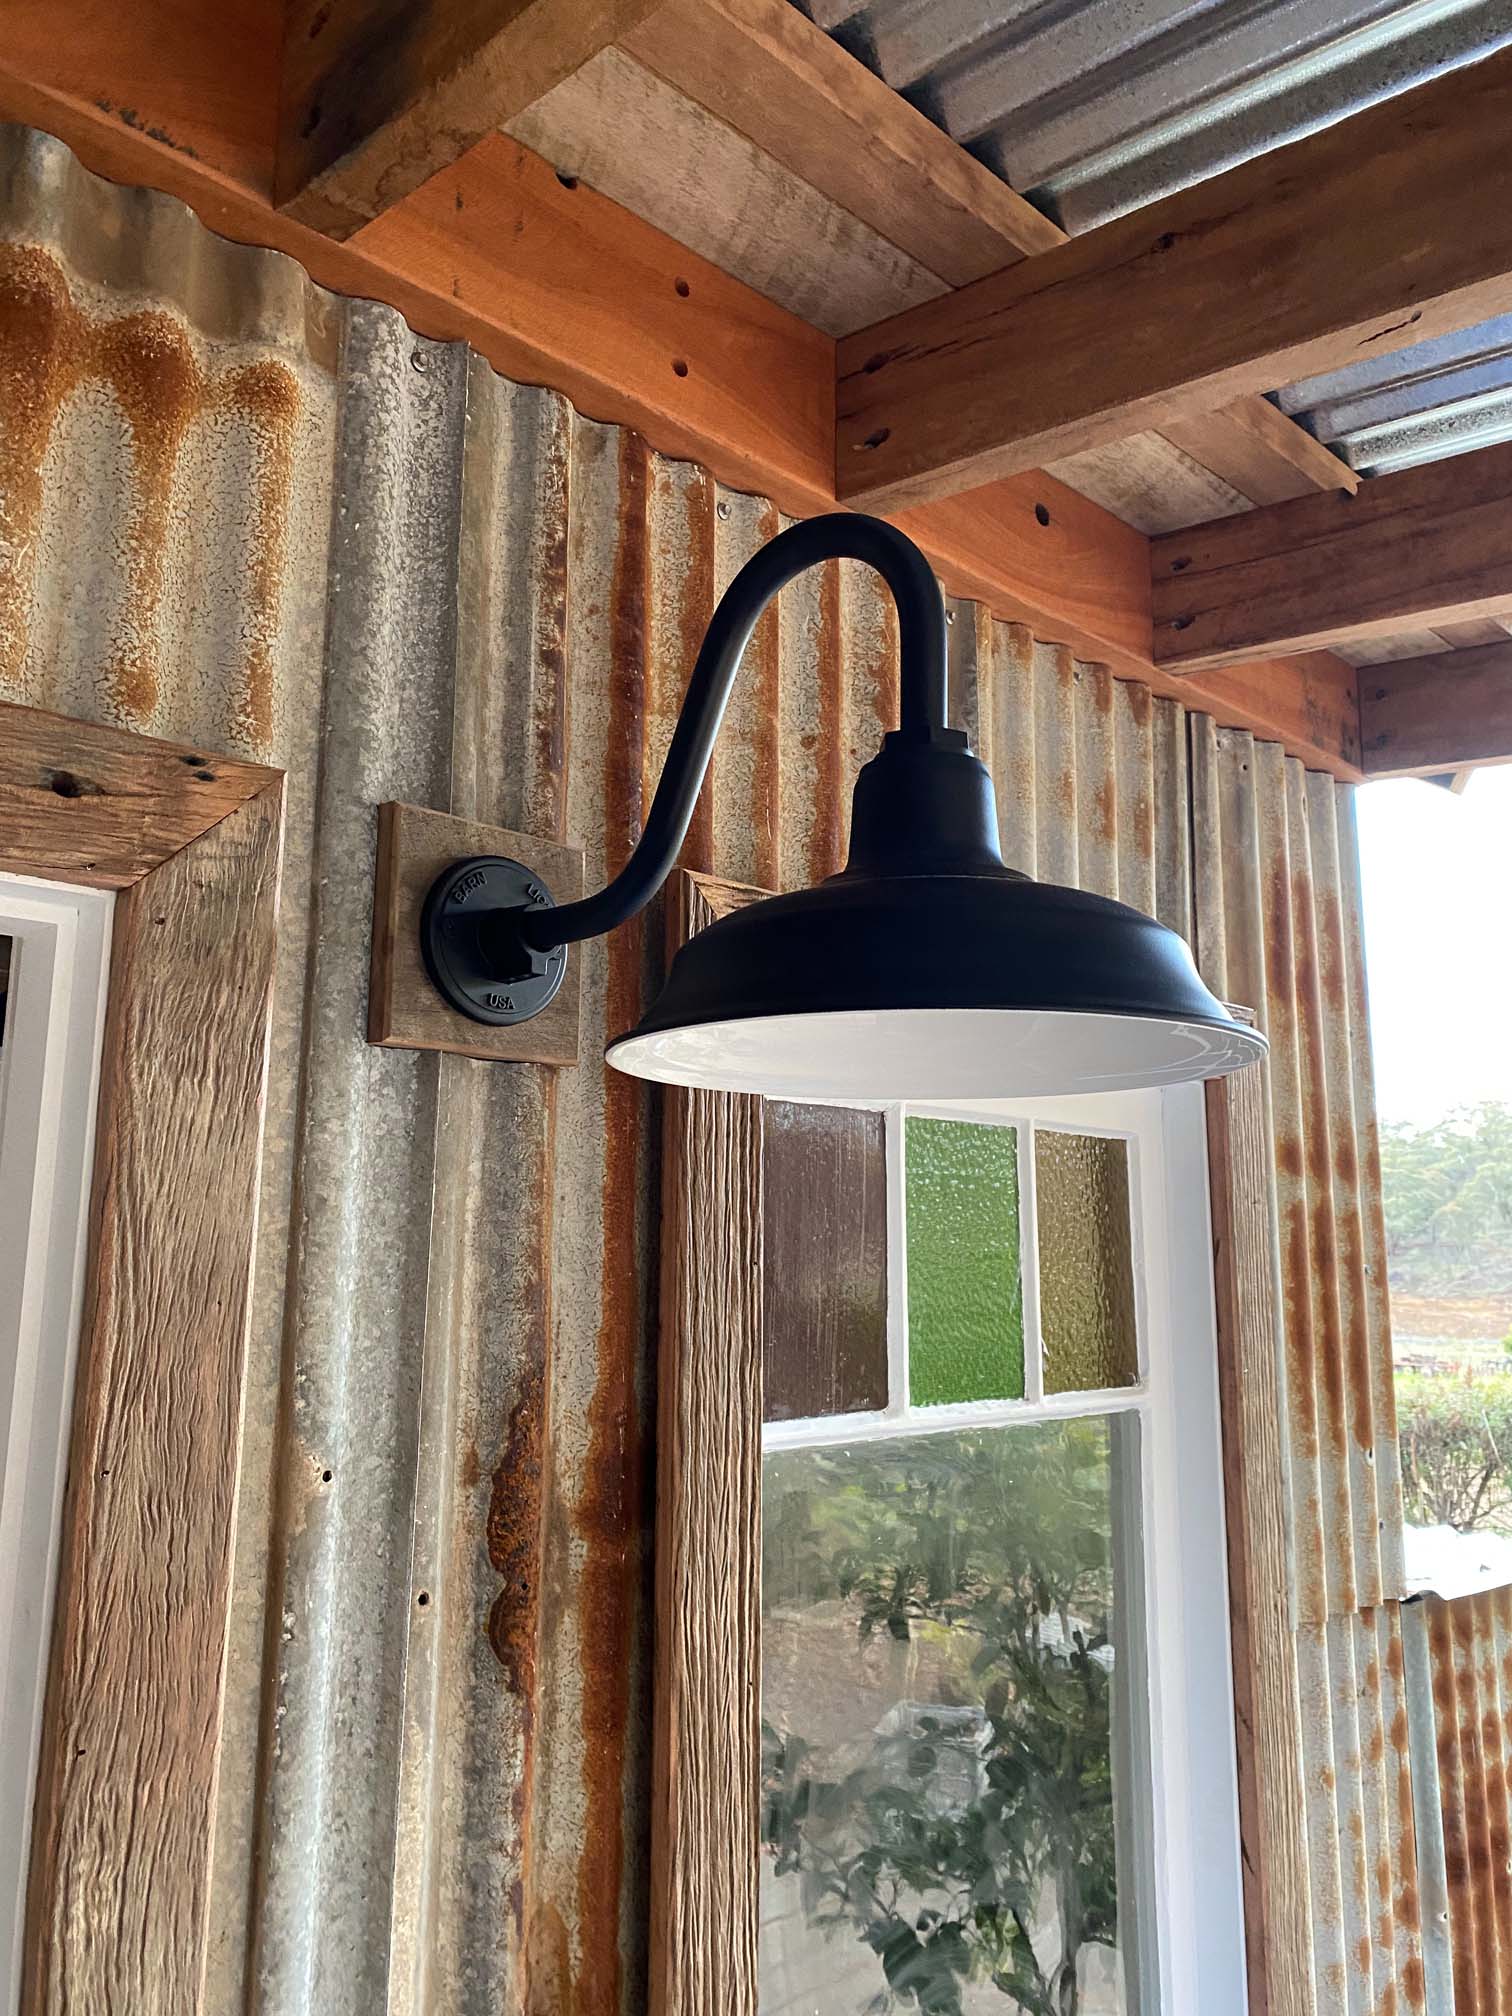 Created by Mable Projects - This cottage is completed with a 33cm Old Dixie Gooseneck Light to bring the entire structure into sync